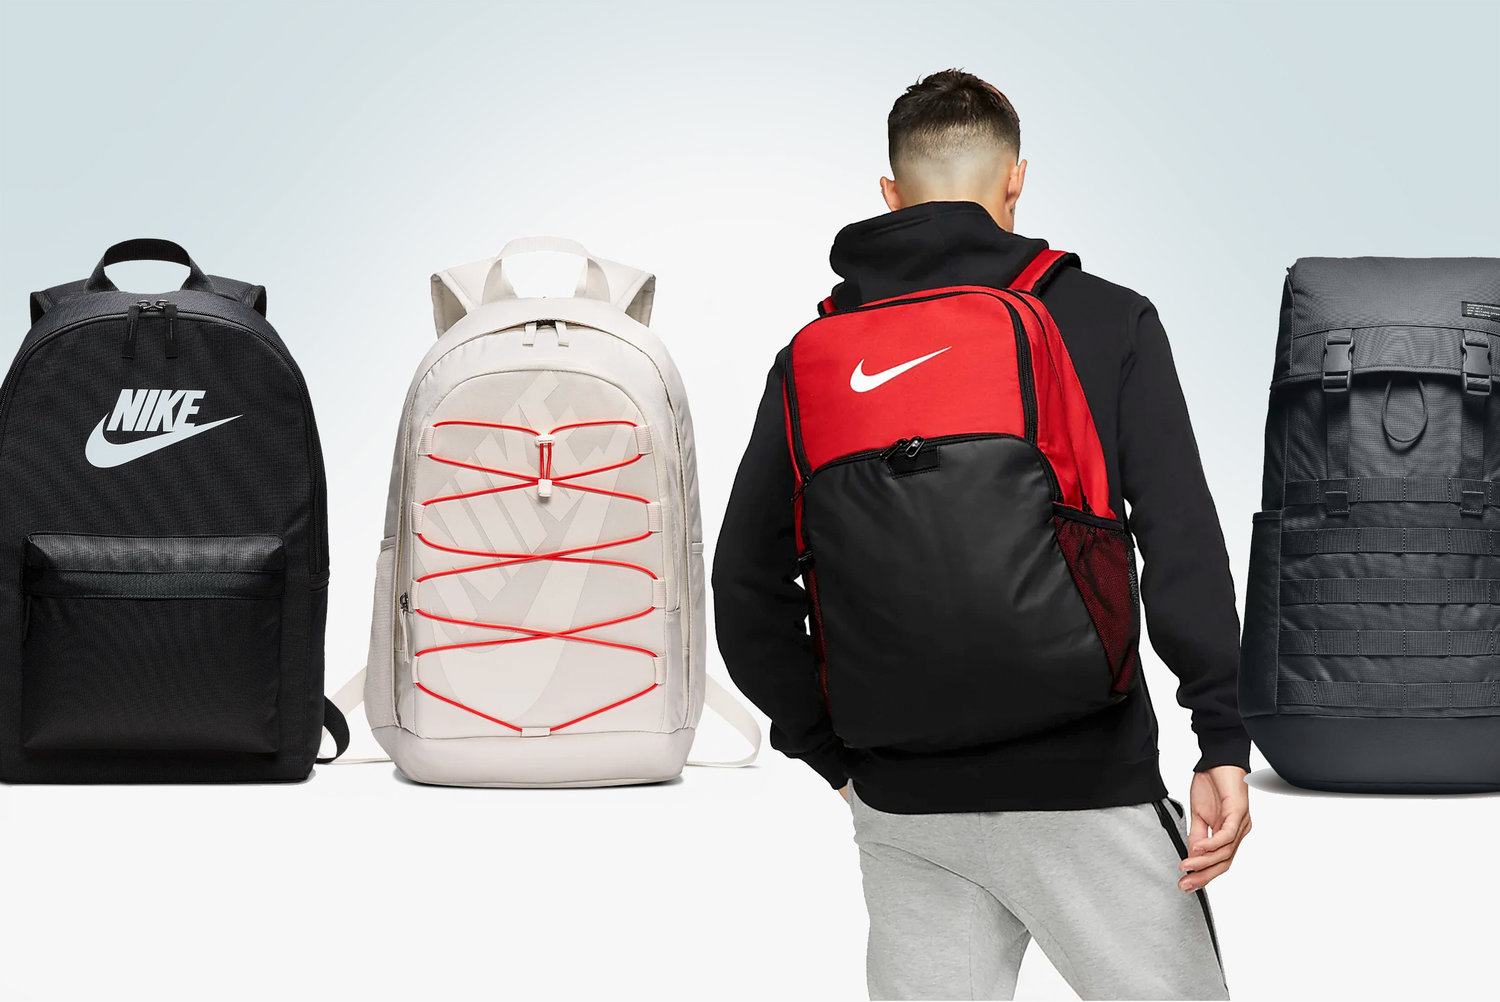 in progress Aggregate carefully Best Nike Backpacks for School - Ultimate 2021 Buying Guide | Backpackies